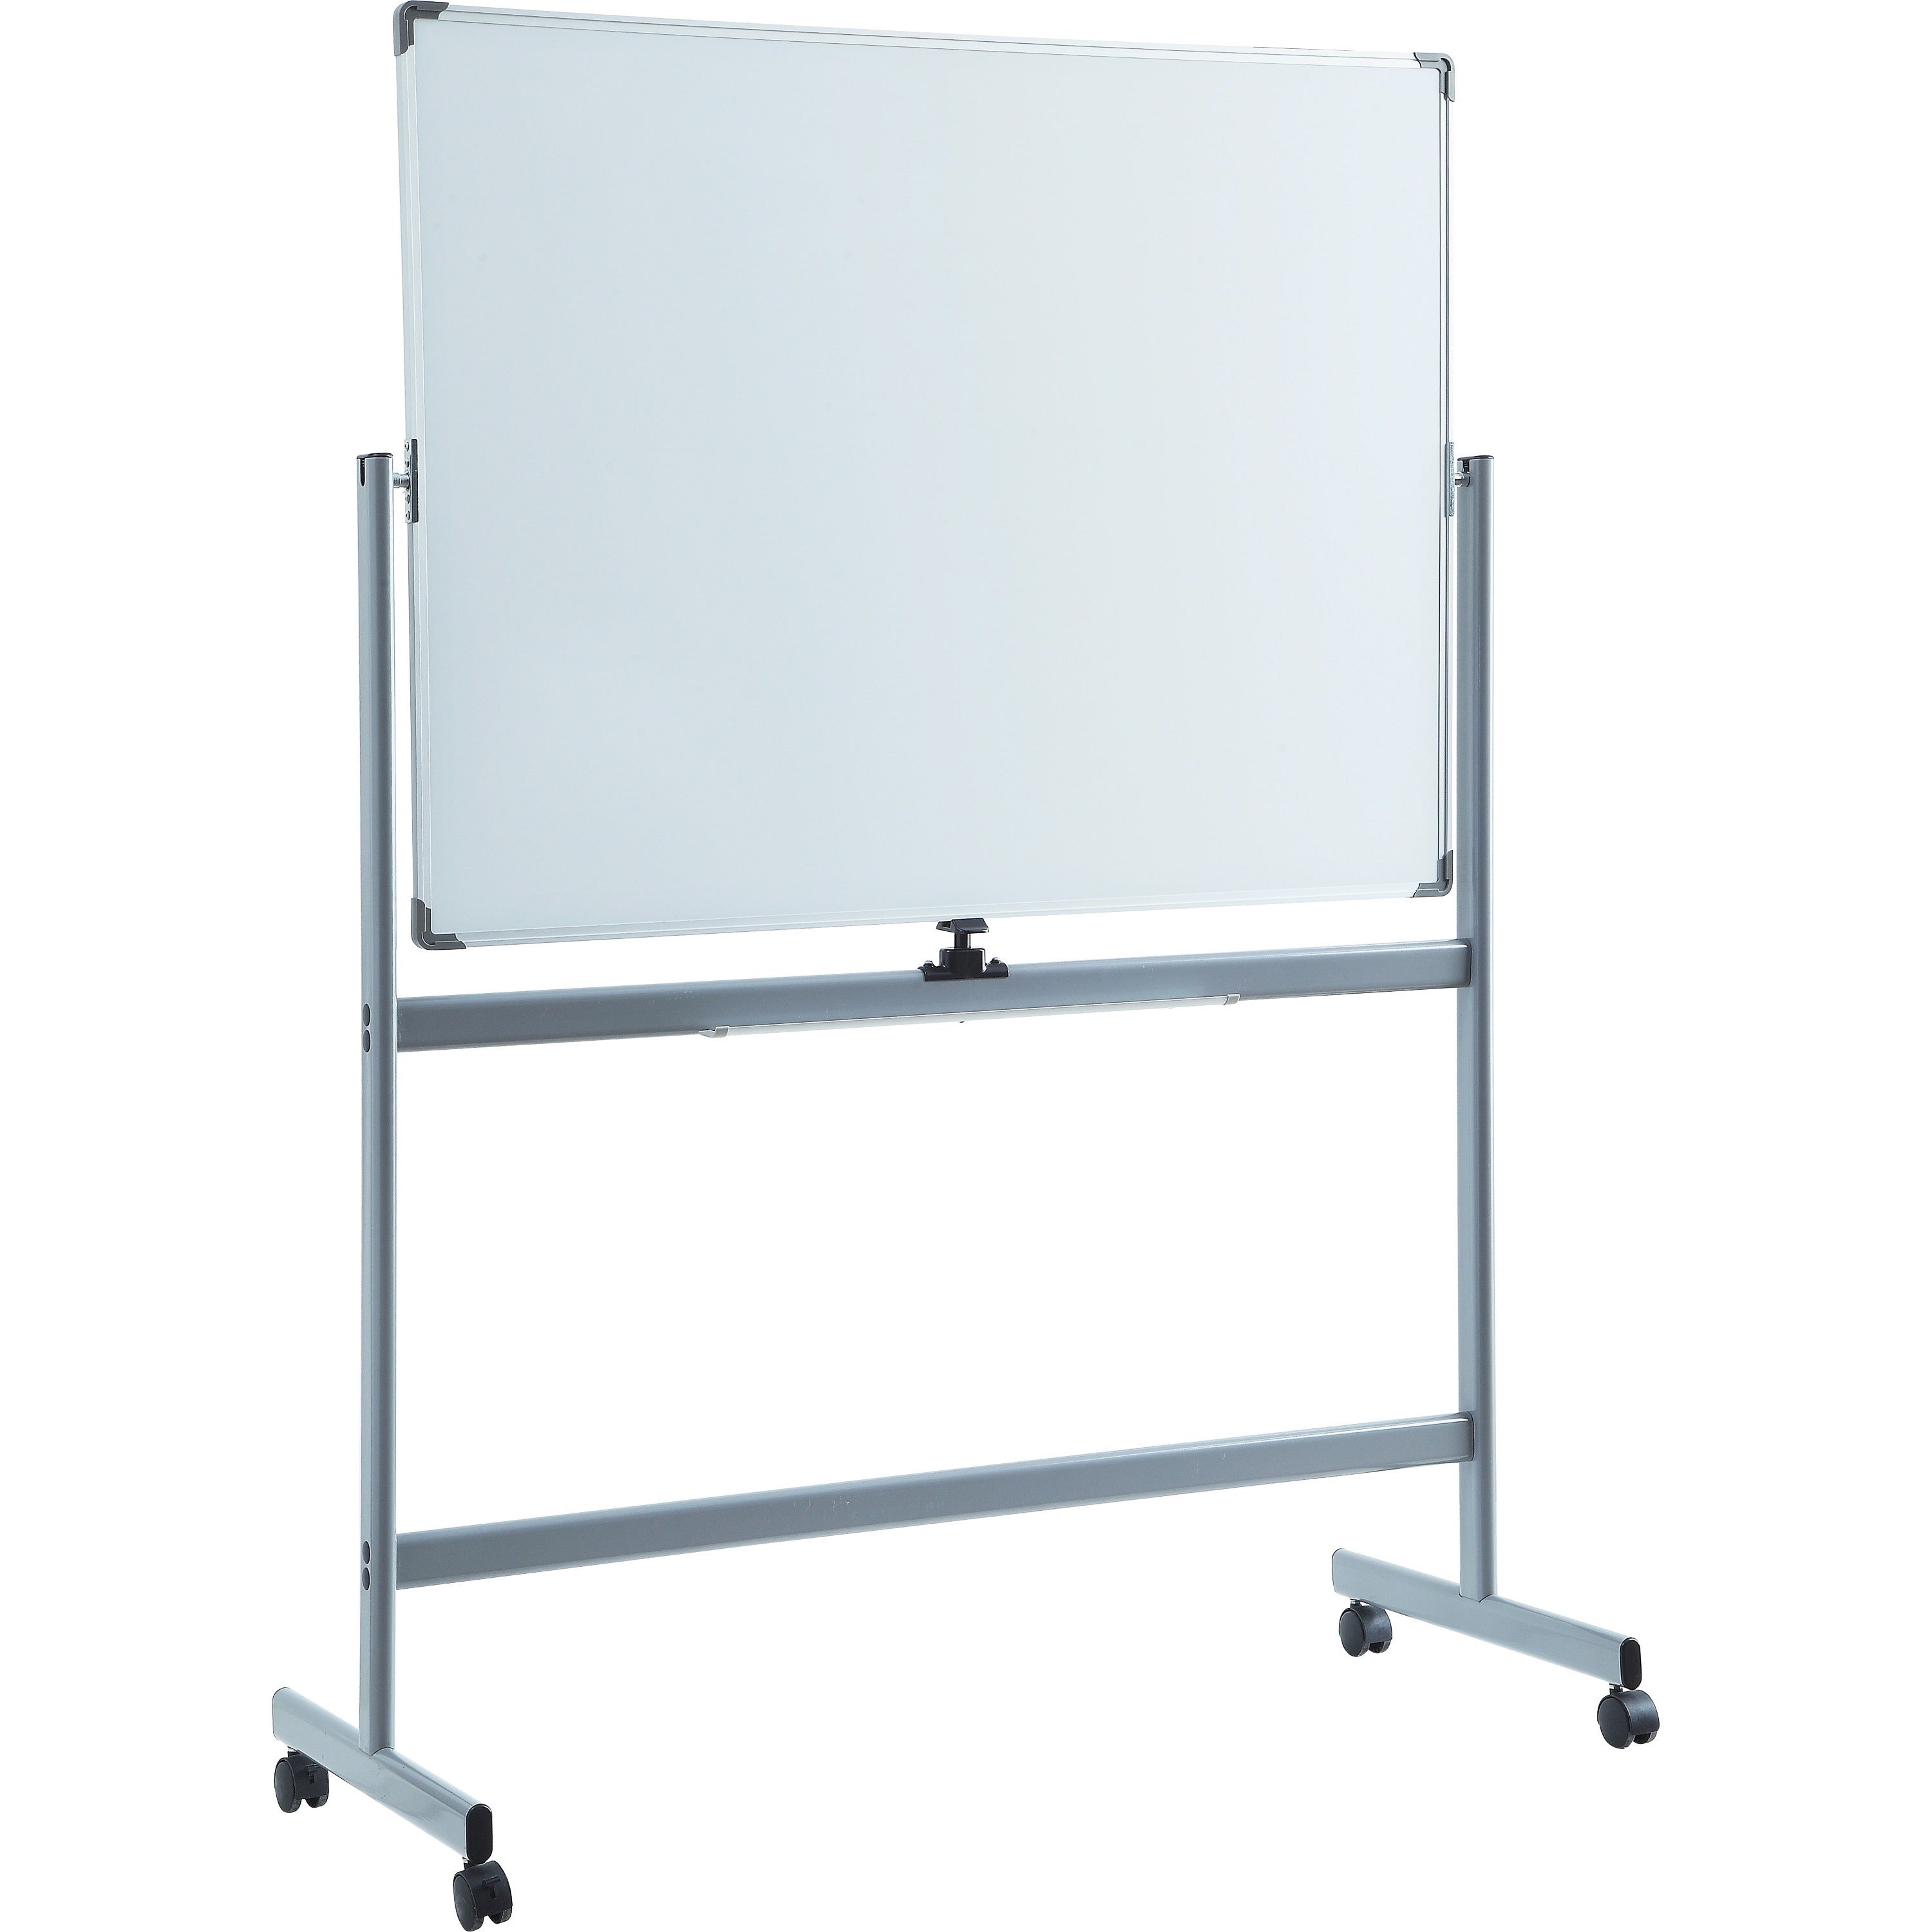 lorell-double-sided-magnetic-whiteboard-easel-48-4-ft-width-x-36-3-ft-height-white-surface-rectangle-floor-standing-magnetic-1-each_llr52568 - 1